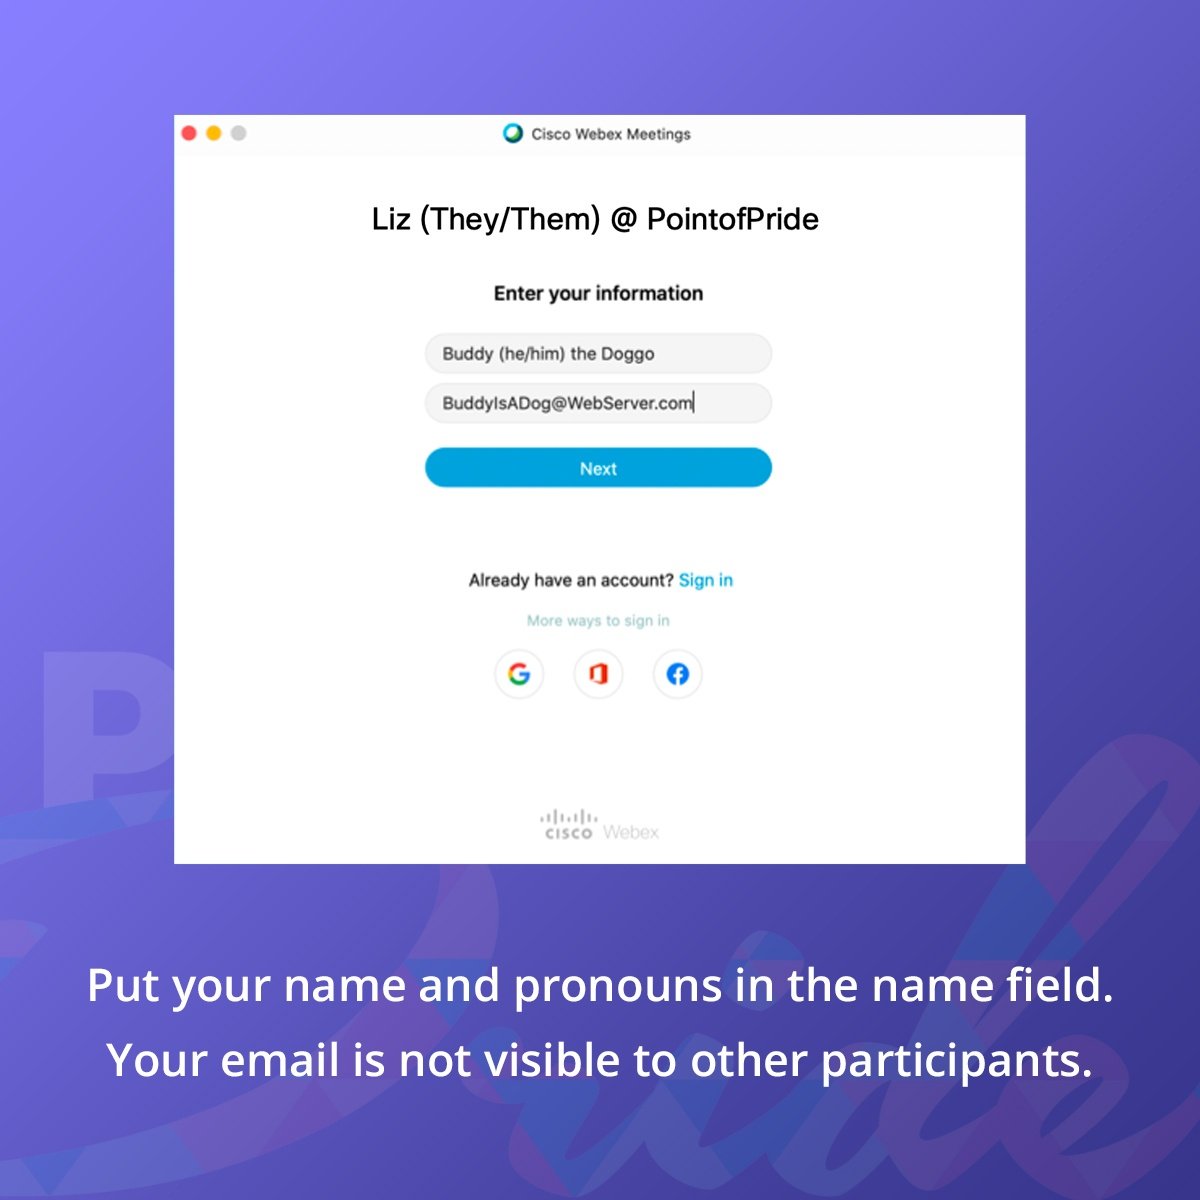 When joining, put your name and pronouns in the name field.